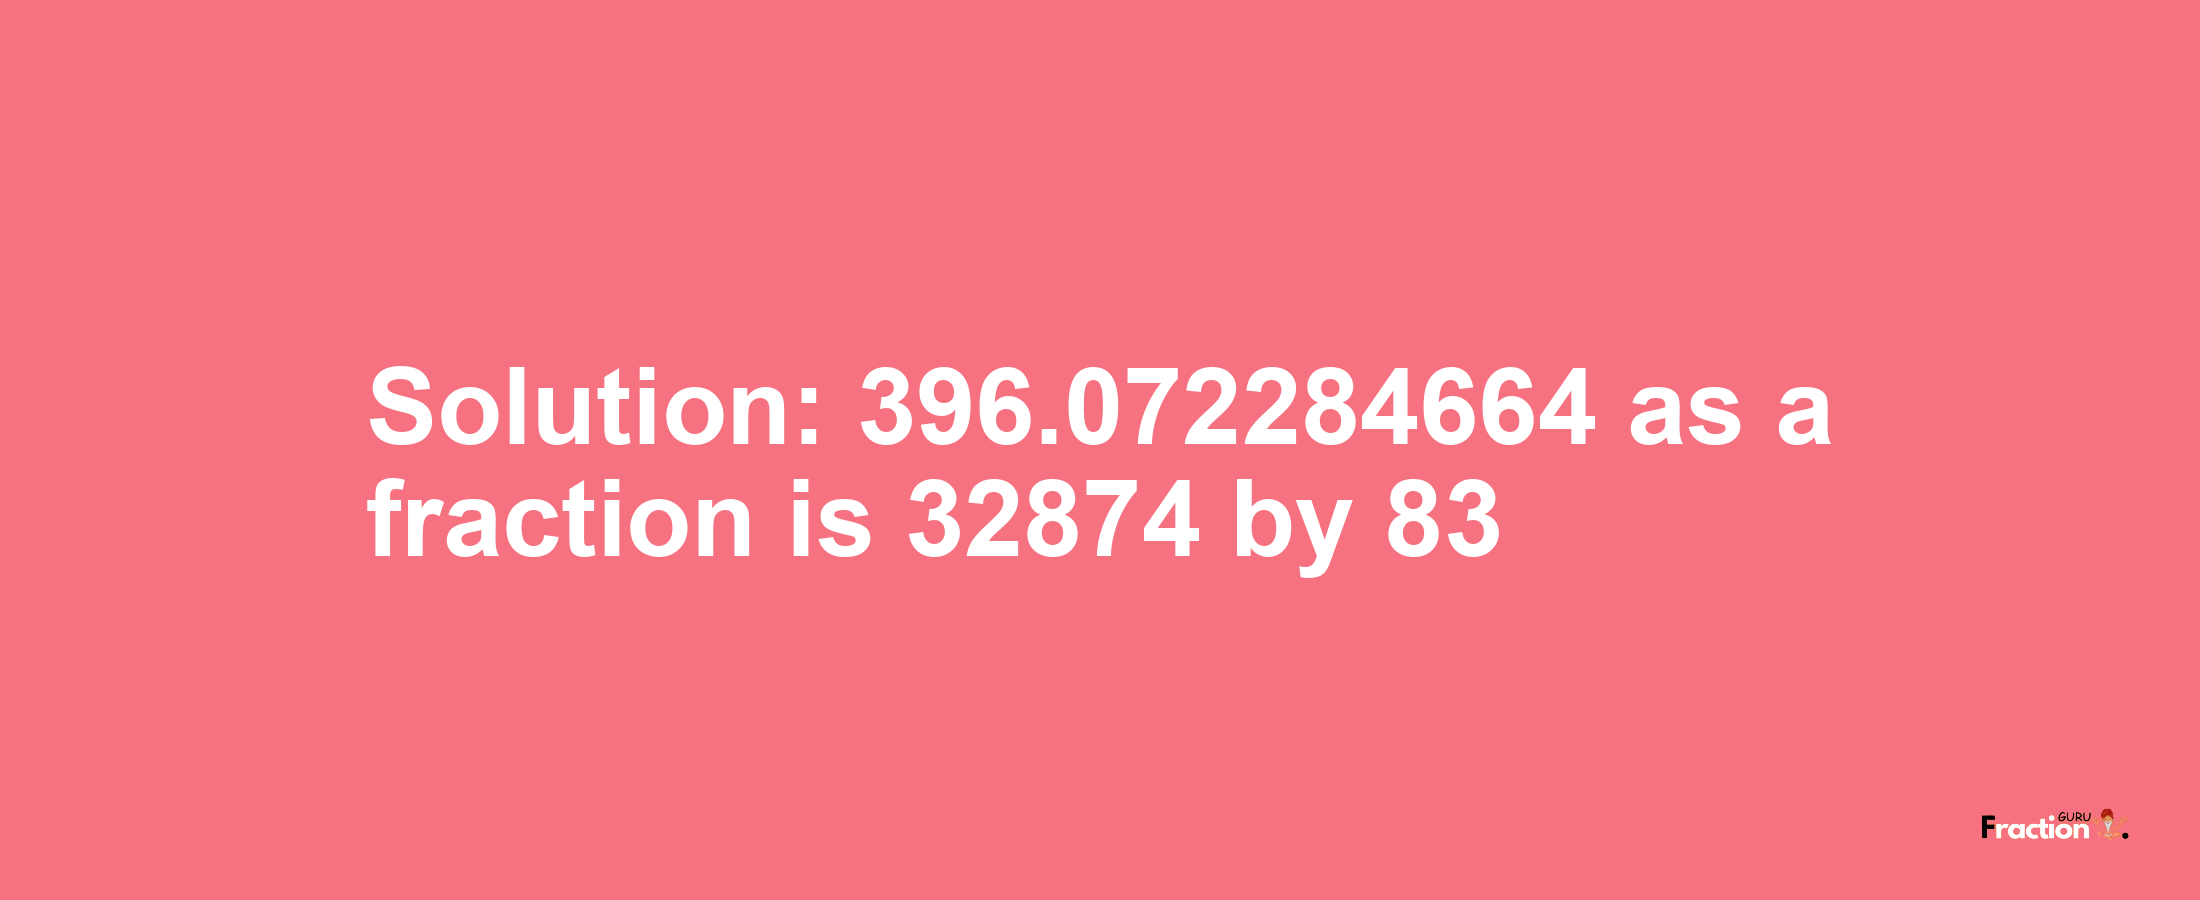 Solution:396.072284664 as a fraction is 32874/83